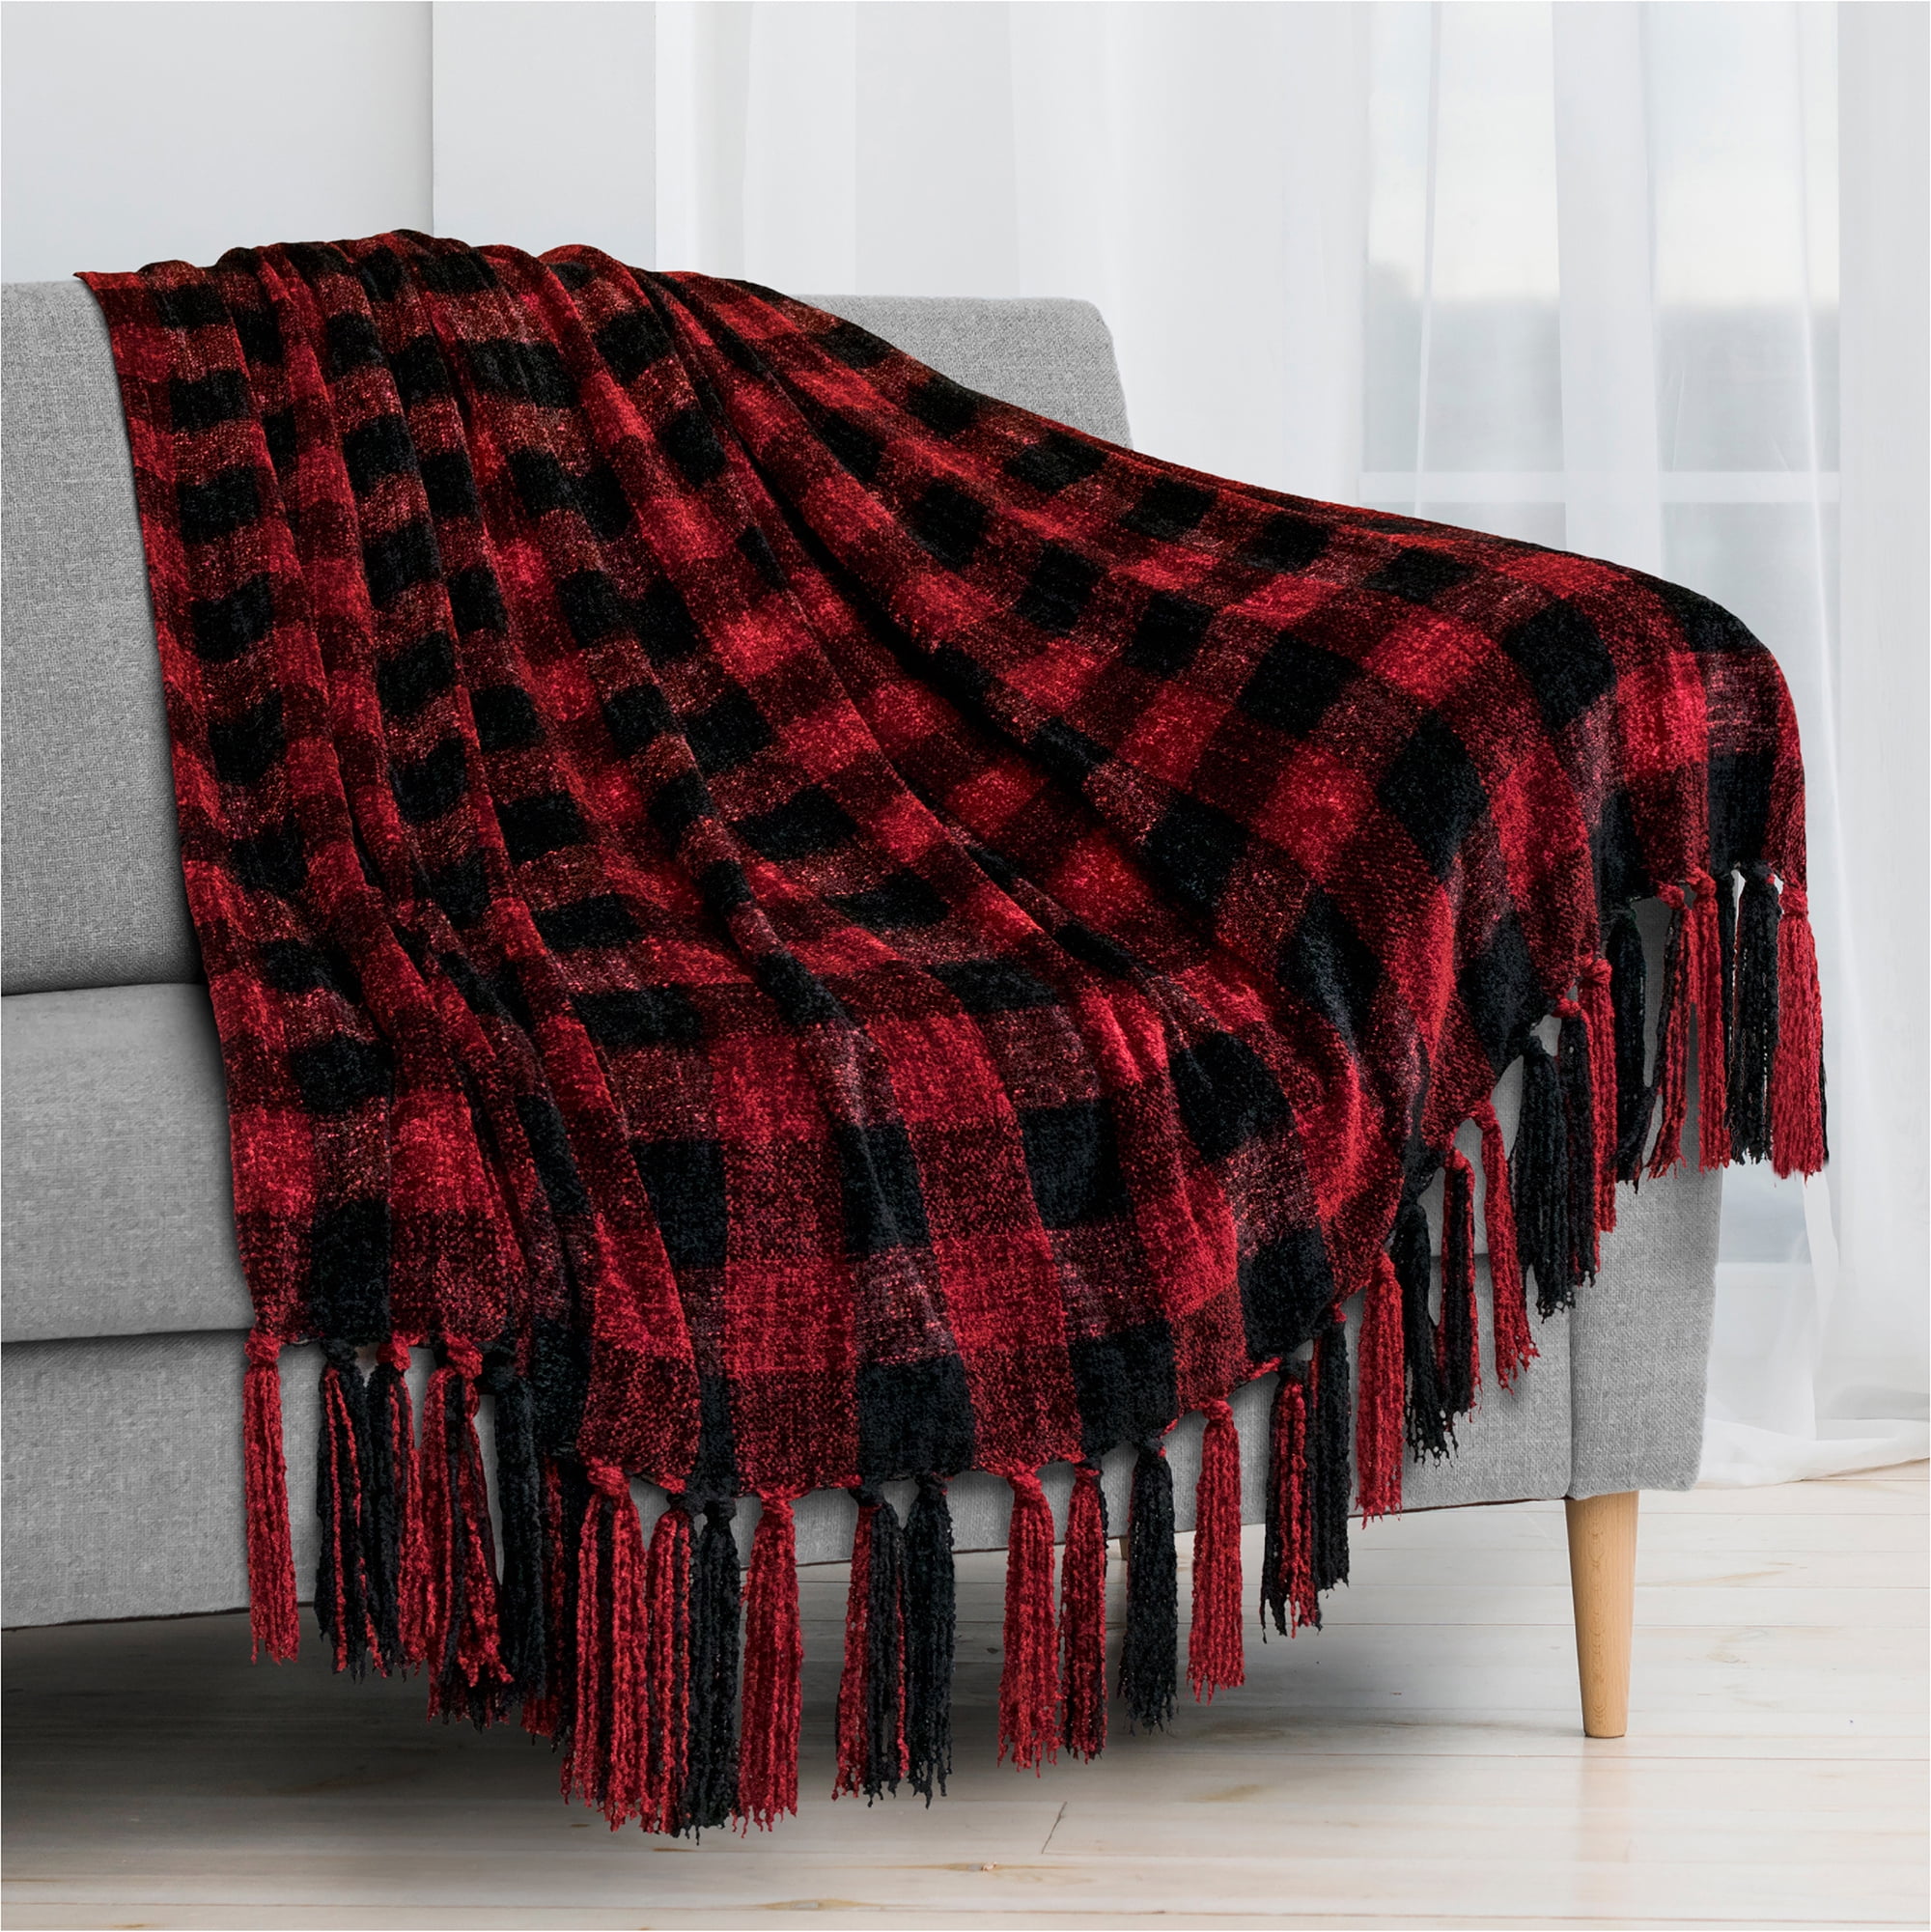 Throw Blanket 50”x60”,Lamb Wool Bed Blanket,Soft Plaid Fashion Style Blanket for Couch,Sofa,Camping